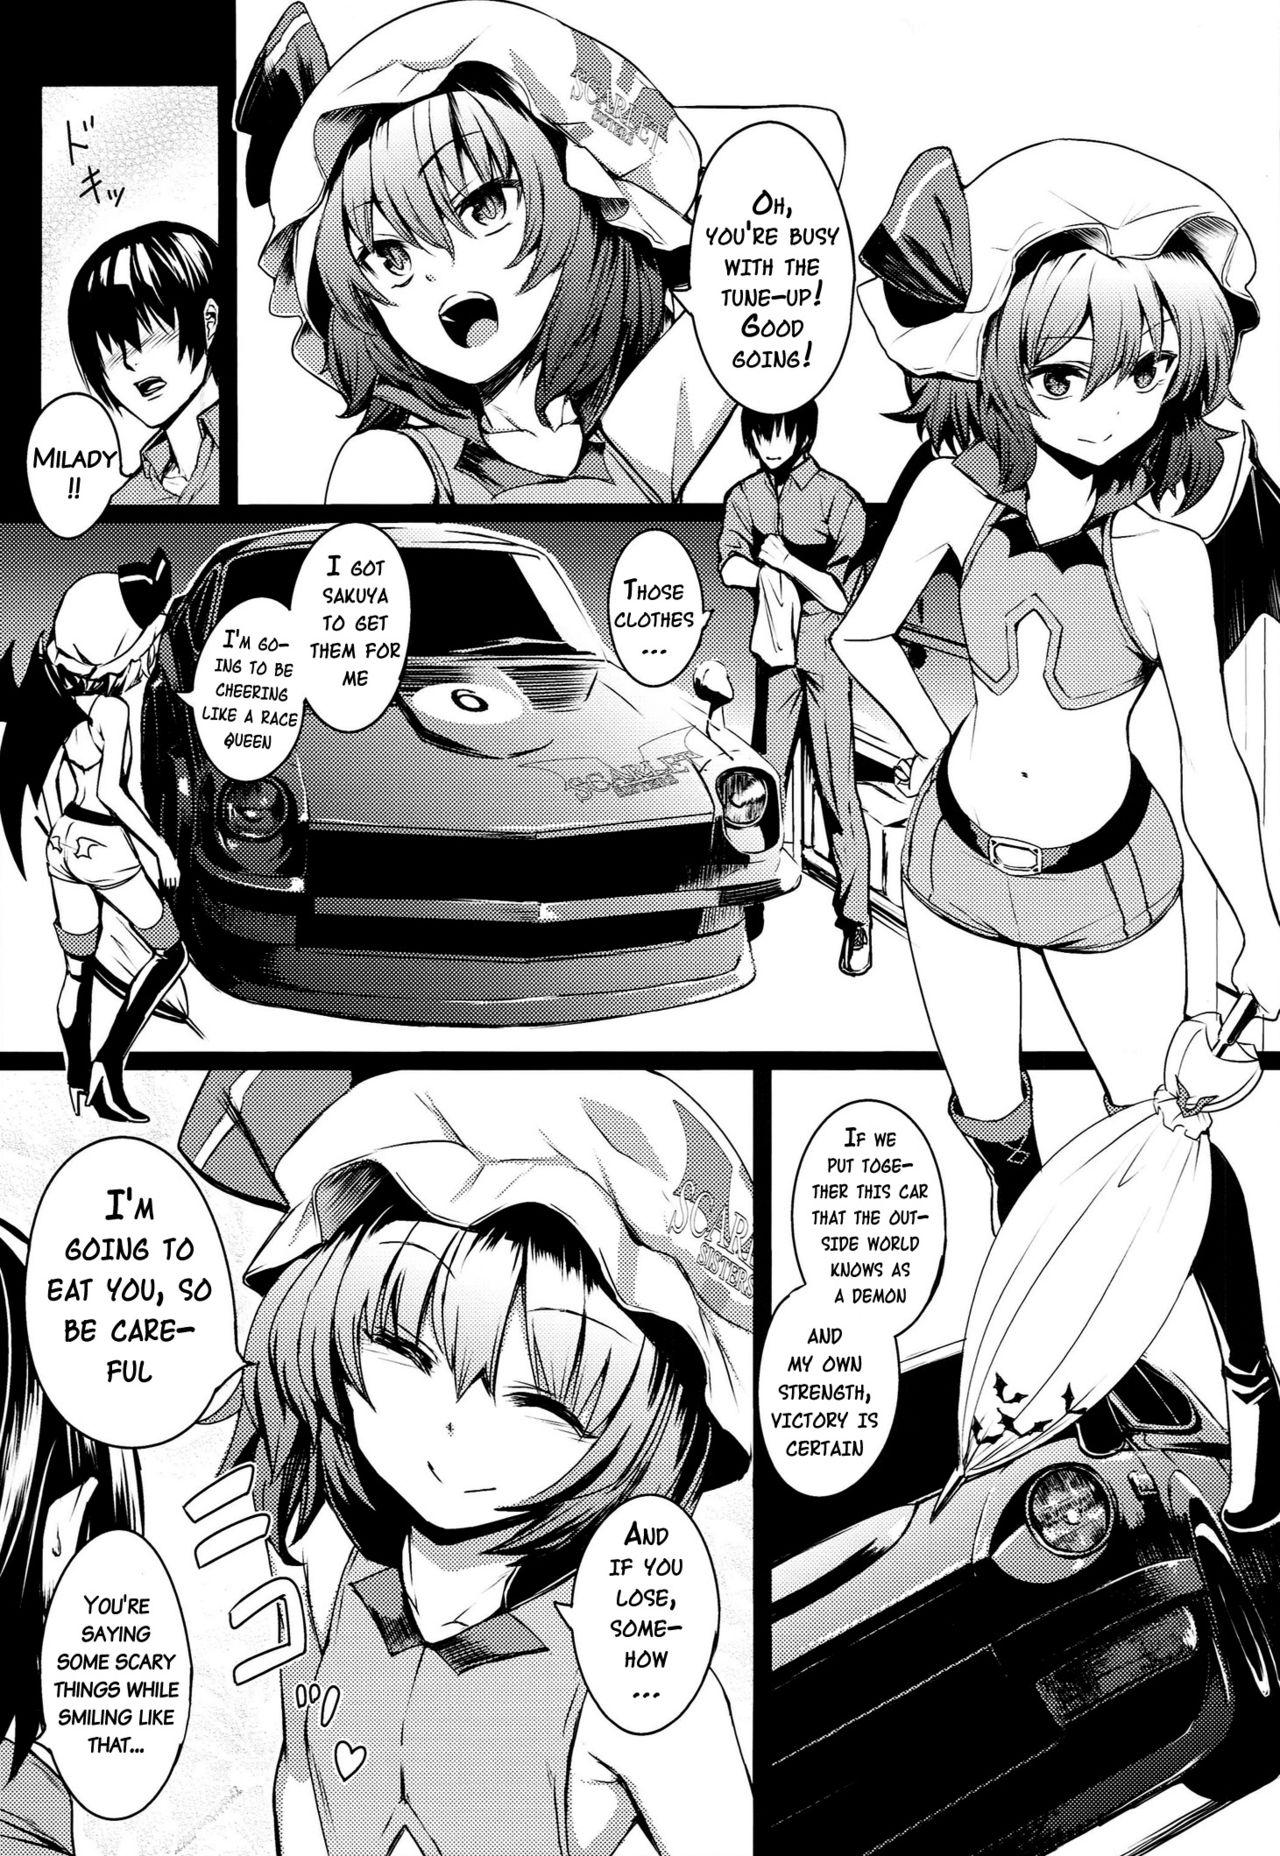 Suckingcock TOUHOU RACE QUEENS COLLABO CLUB - Touhou project Unshaved - Page 4